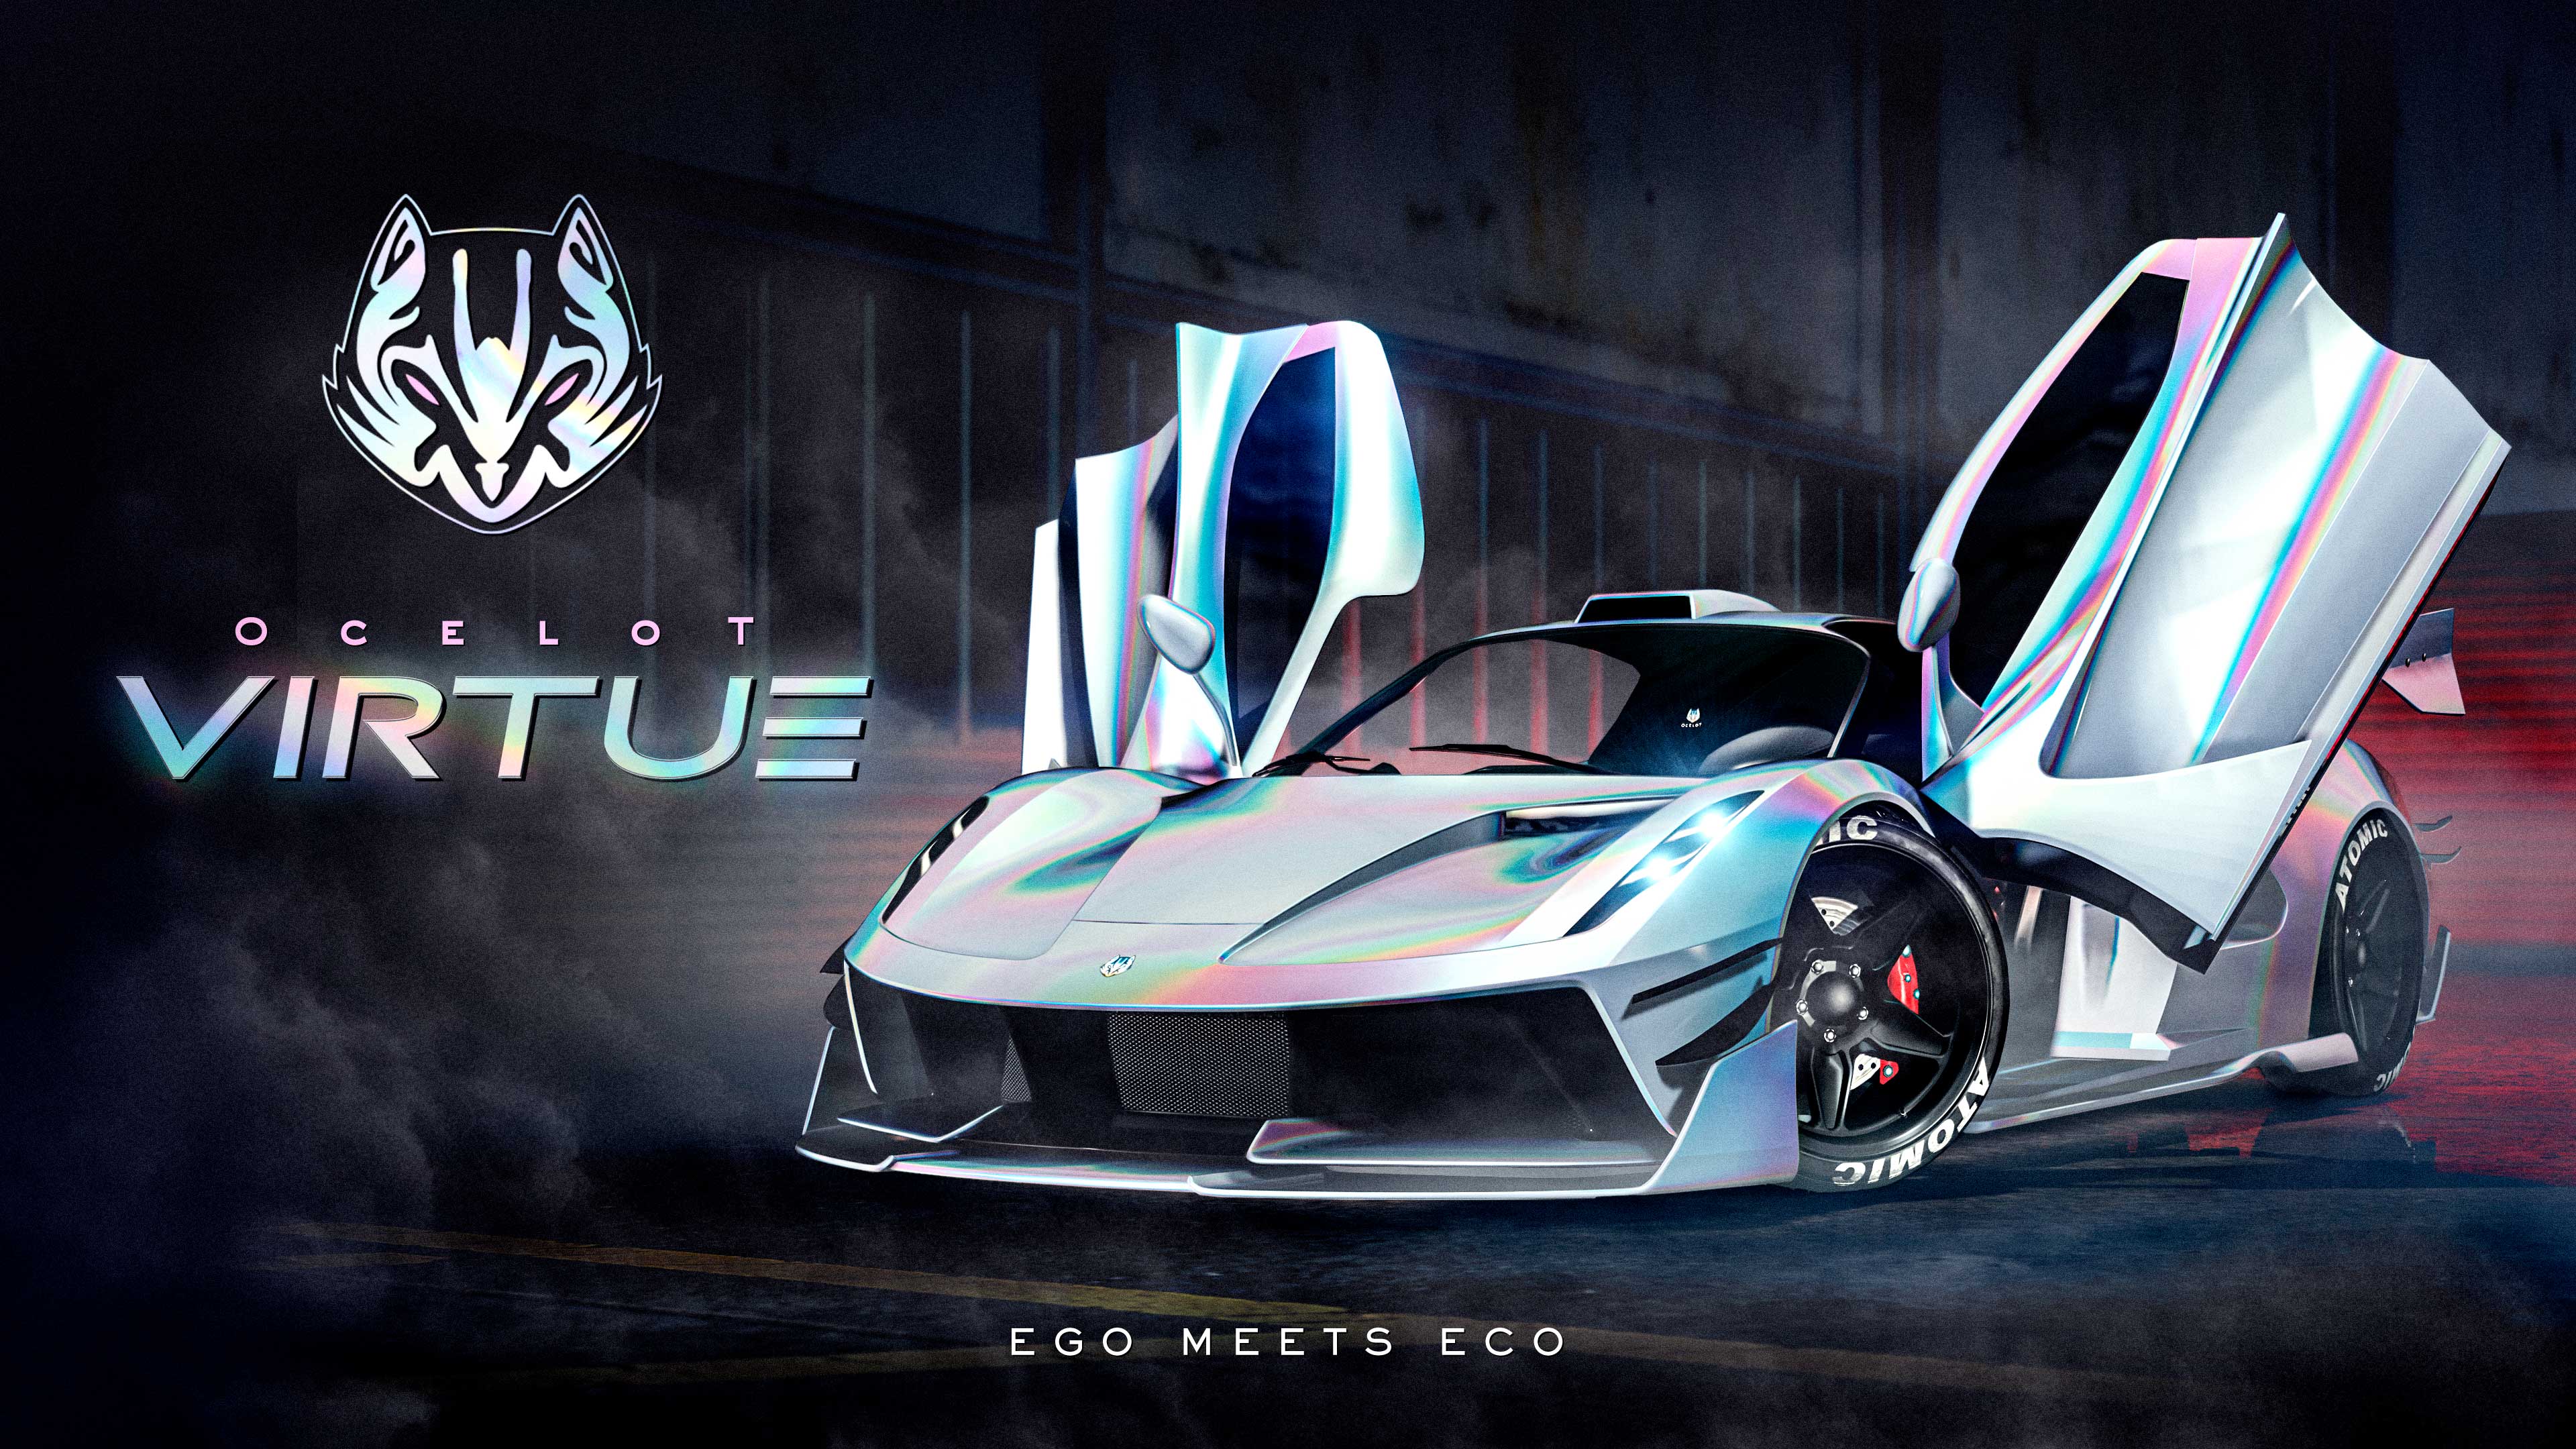 Ocelot Virtue vehicle poster and logo